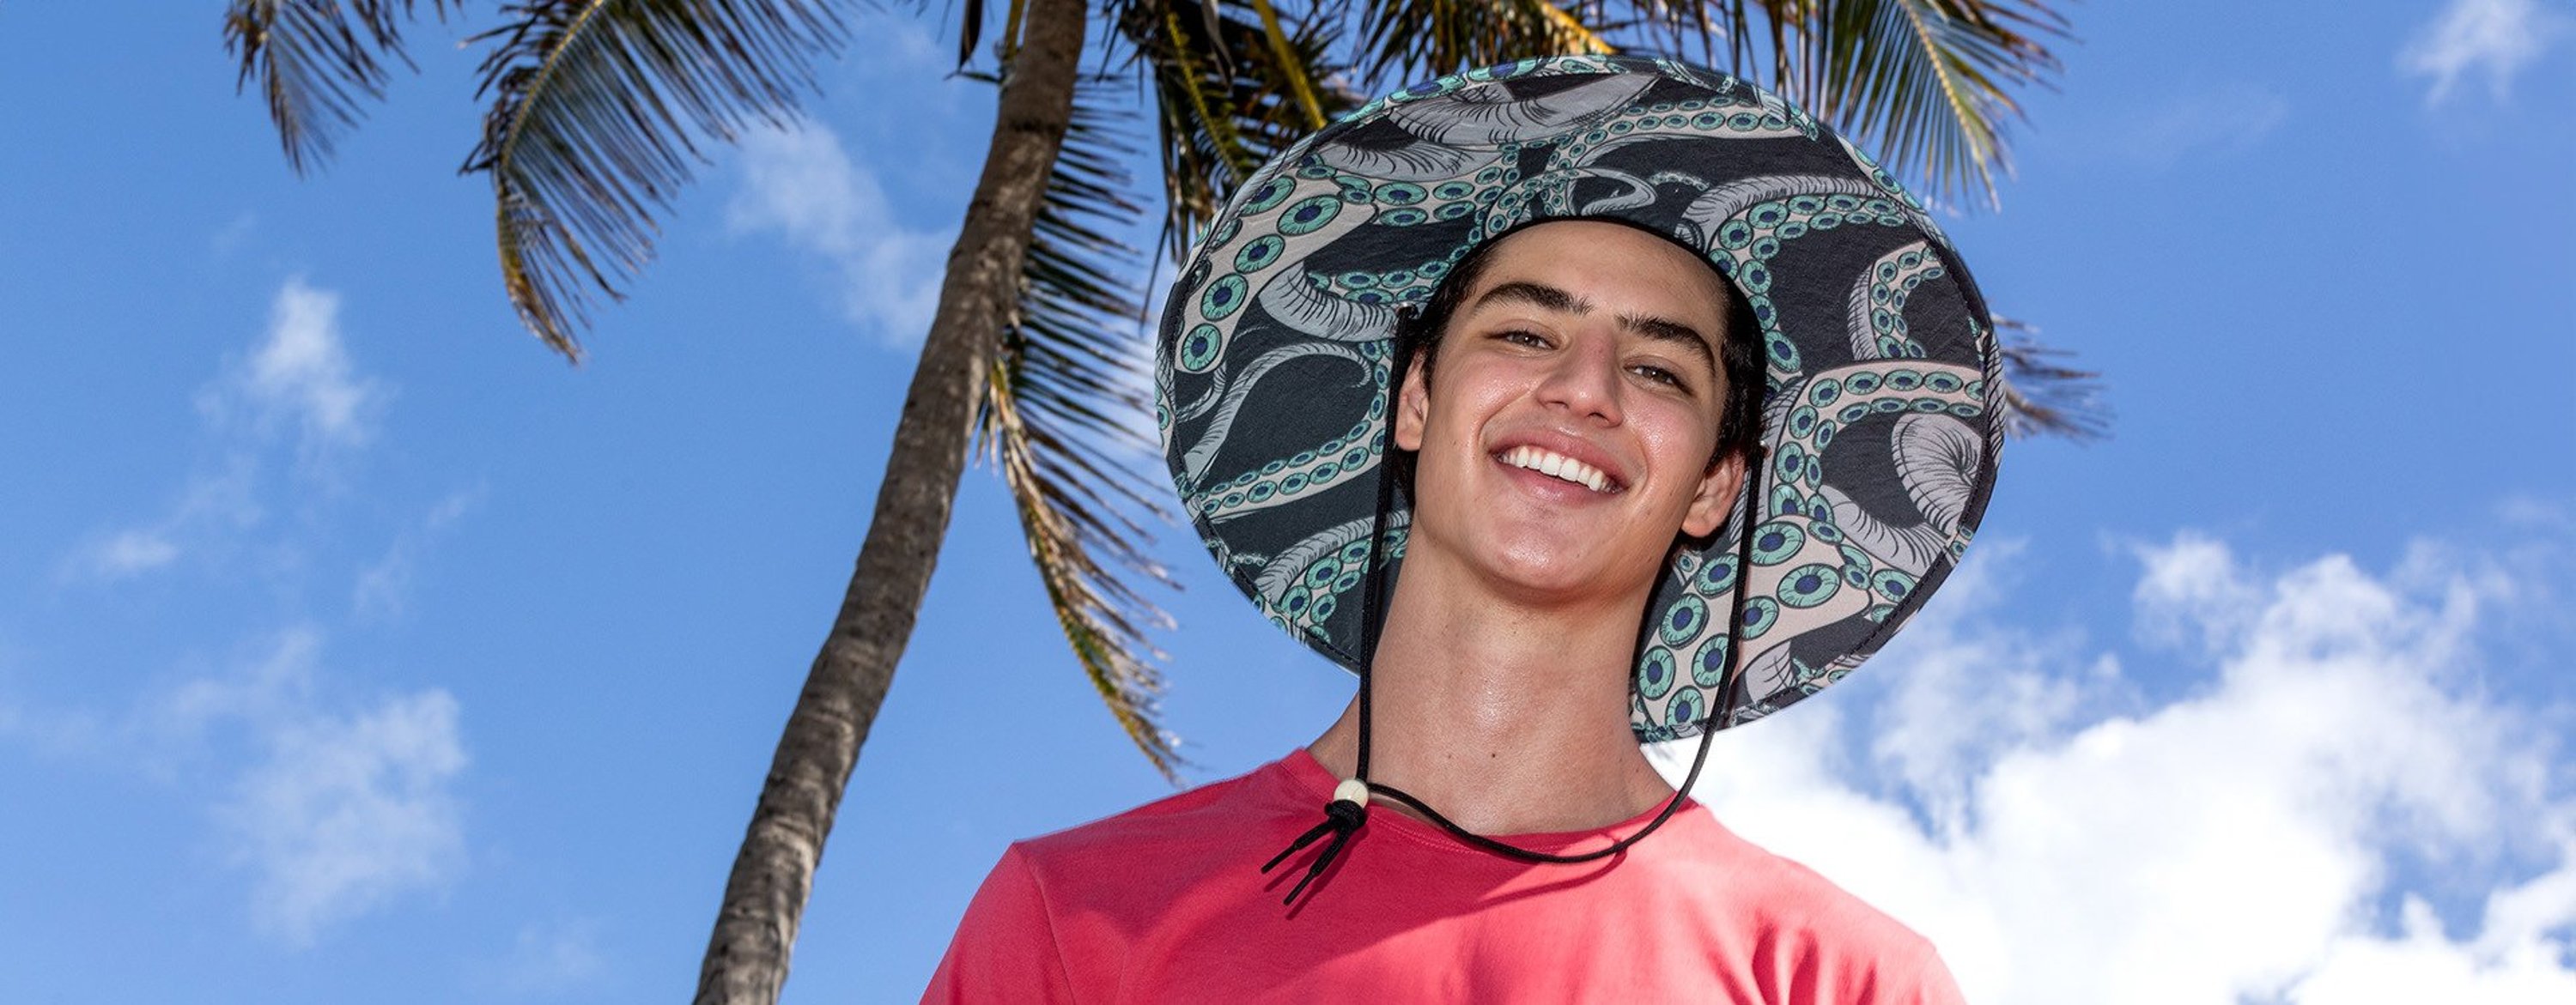 guy outdoors wearing tentacle print straw lifeguard hat